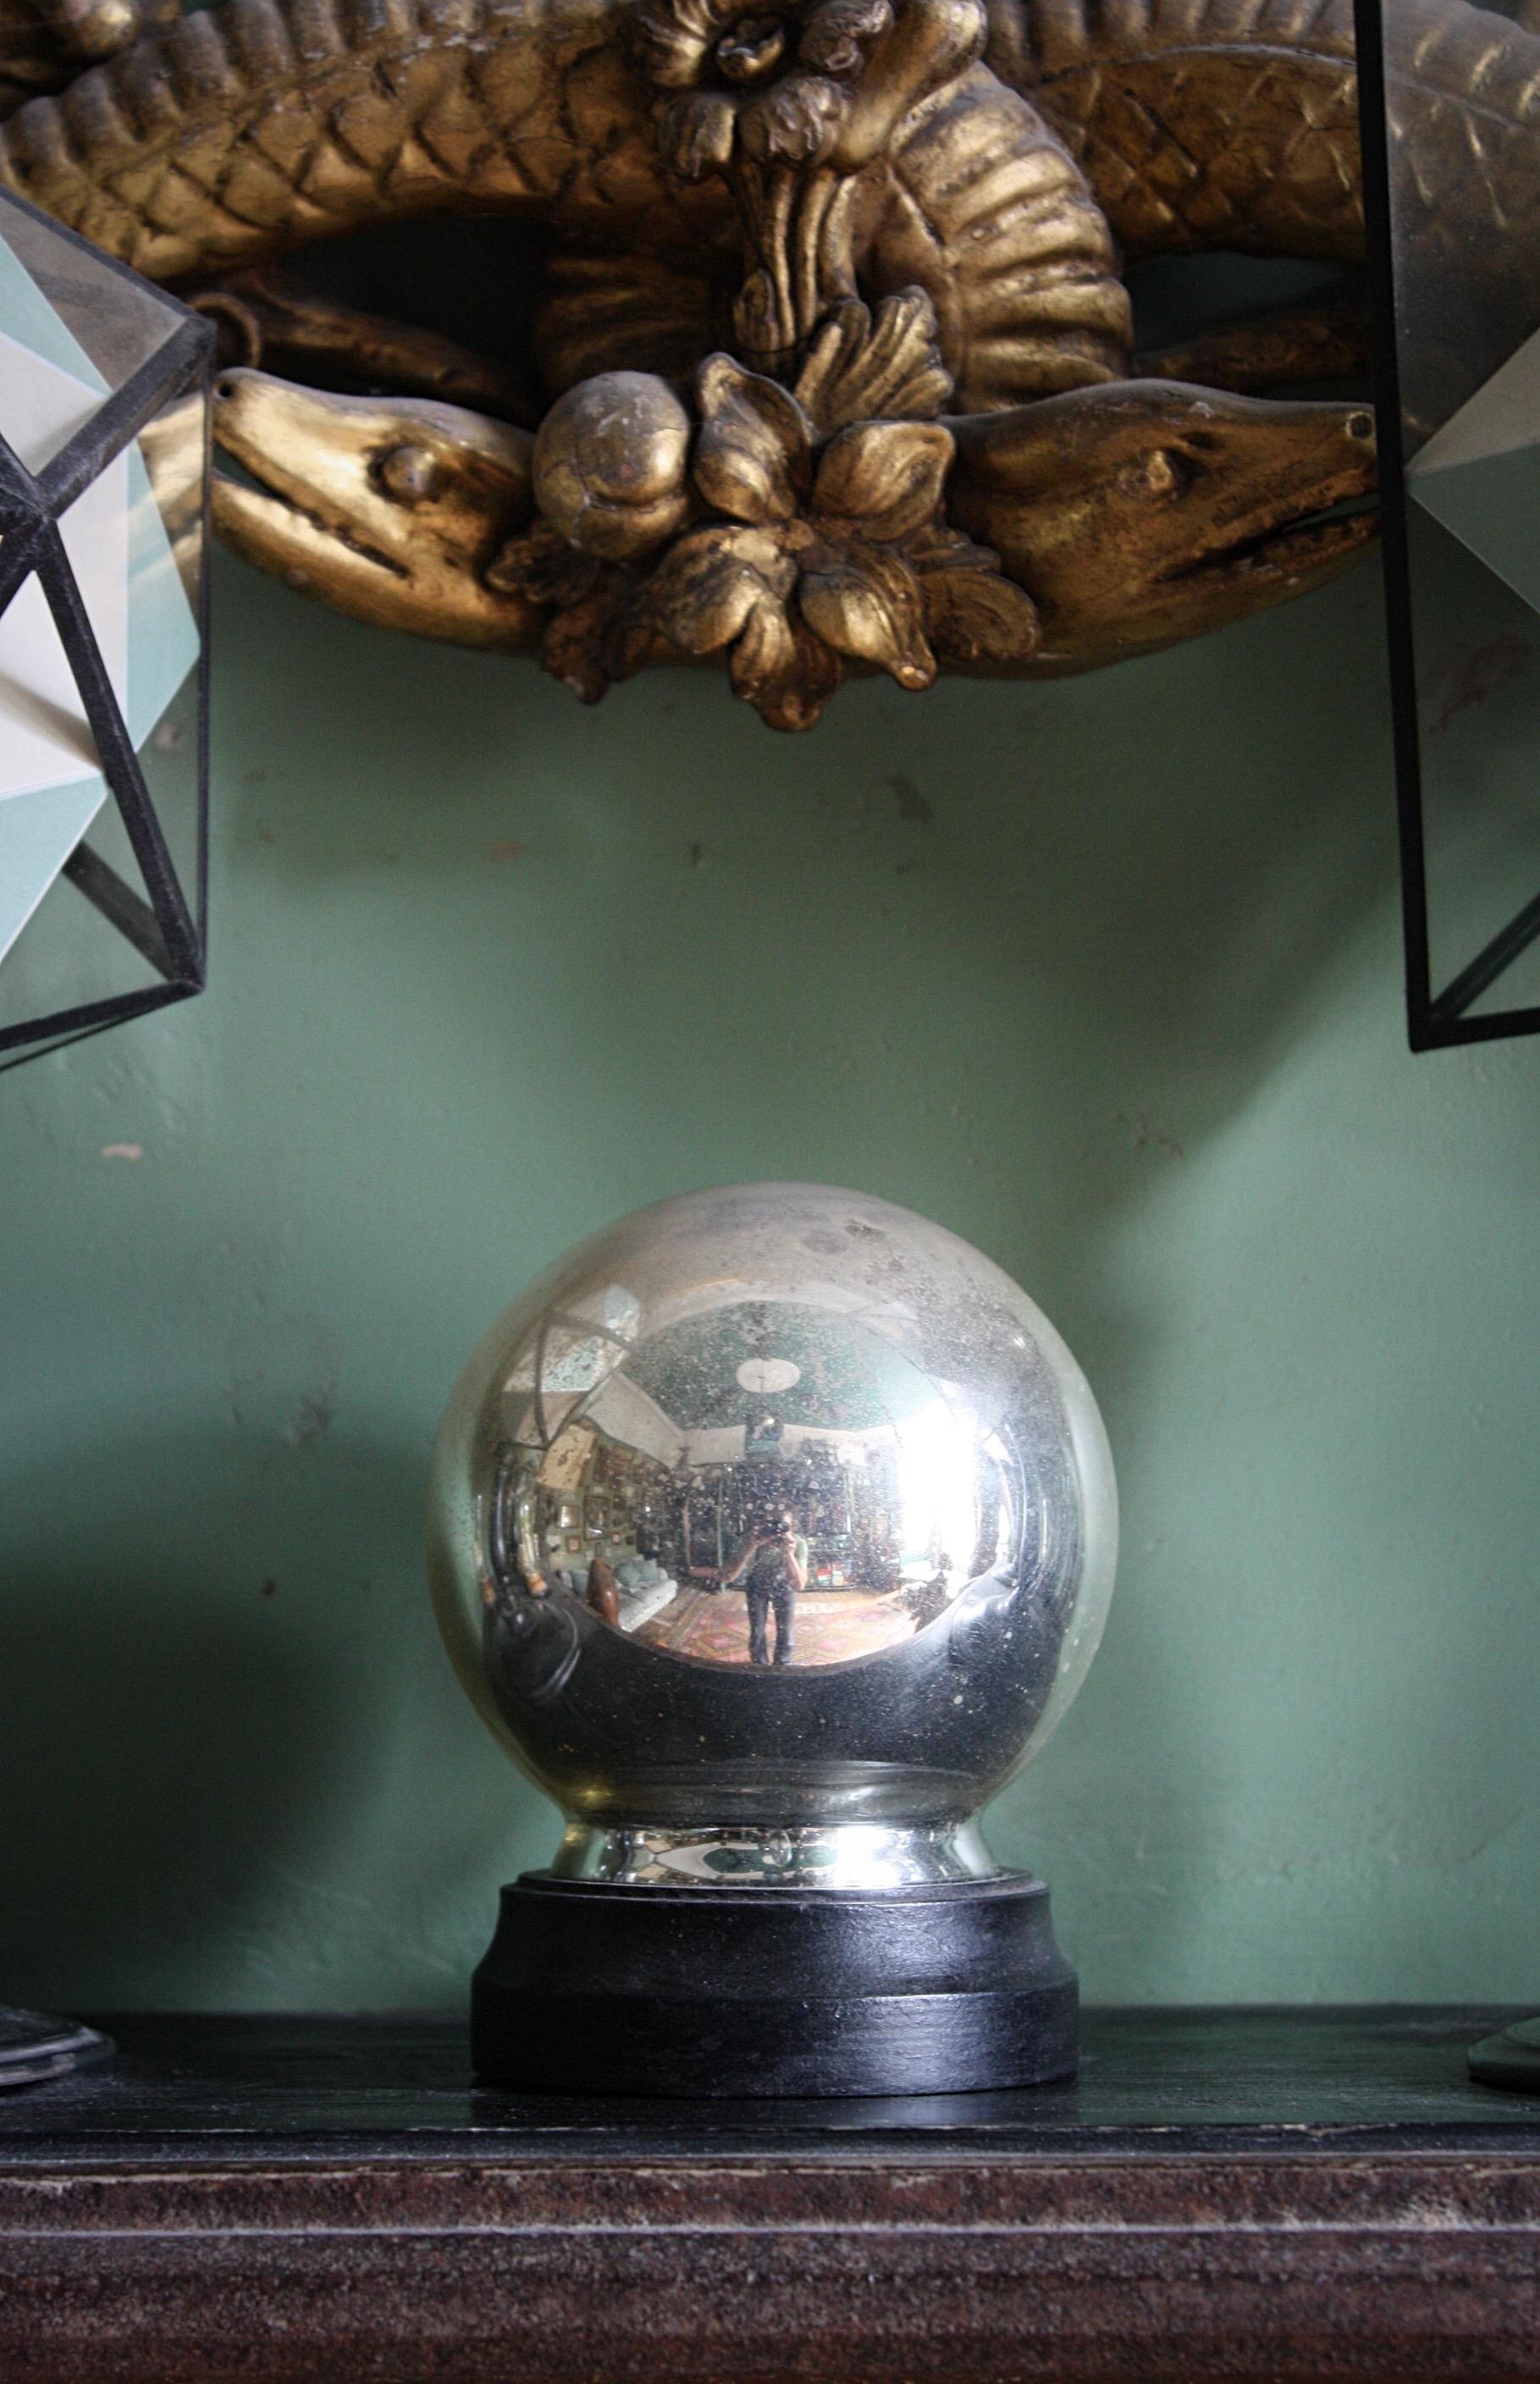 A 19th century mercury glass witches ball on a later purpose made ebonised stand. The witches ball has a small glass lipped base that sits perfectly on the stand. 

The ball is heavily foxed around the top third and this gradually wanes as you move